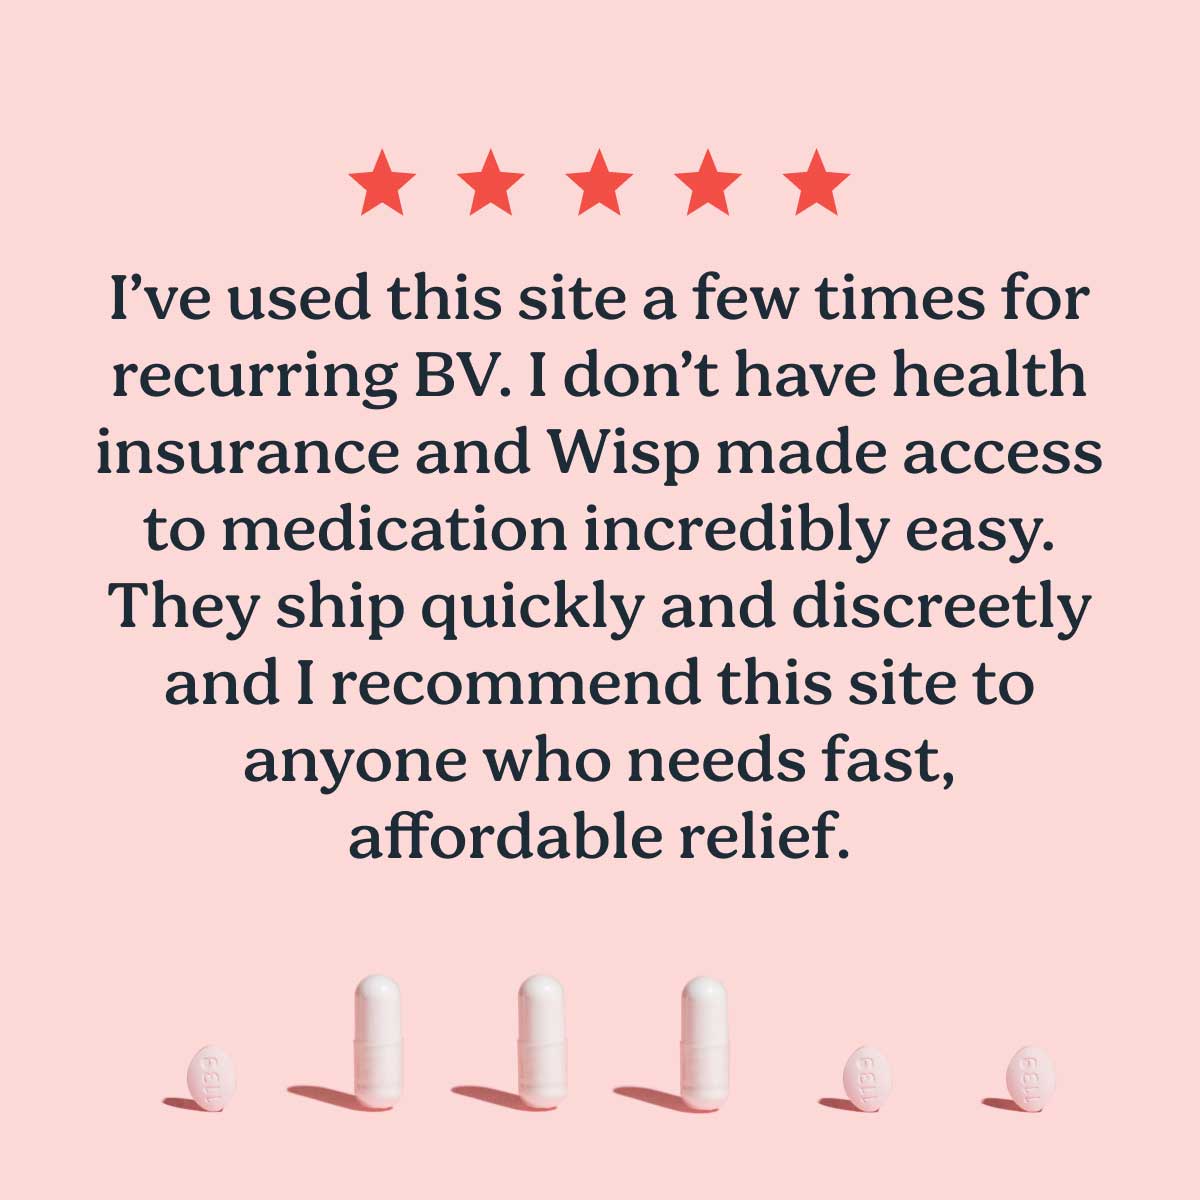 5-Star Customer Review for BV Treatment with pill cutouts on a pink background